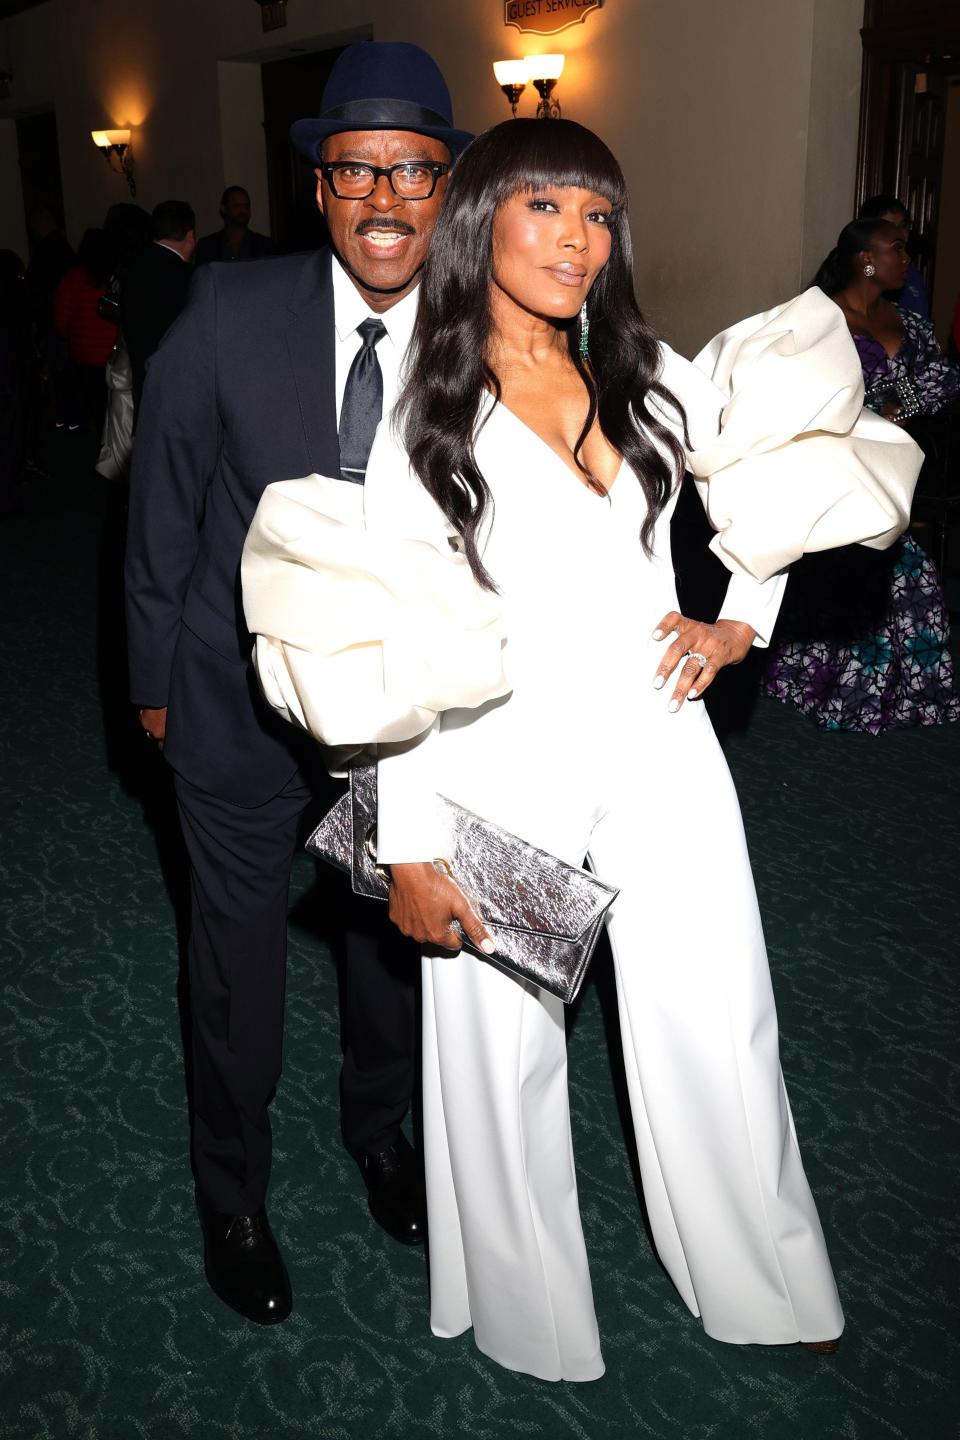 Courtney B. Vance, left, and Angela Bassett at the NAACP Image Awards in Pasadena, Calif., on Feb. 25.